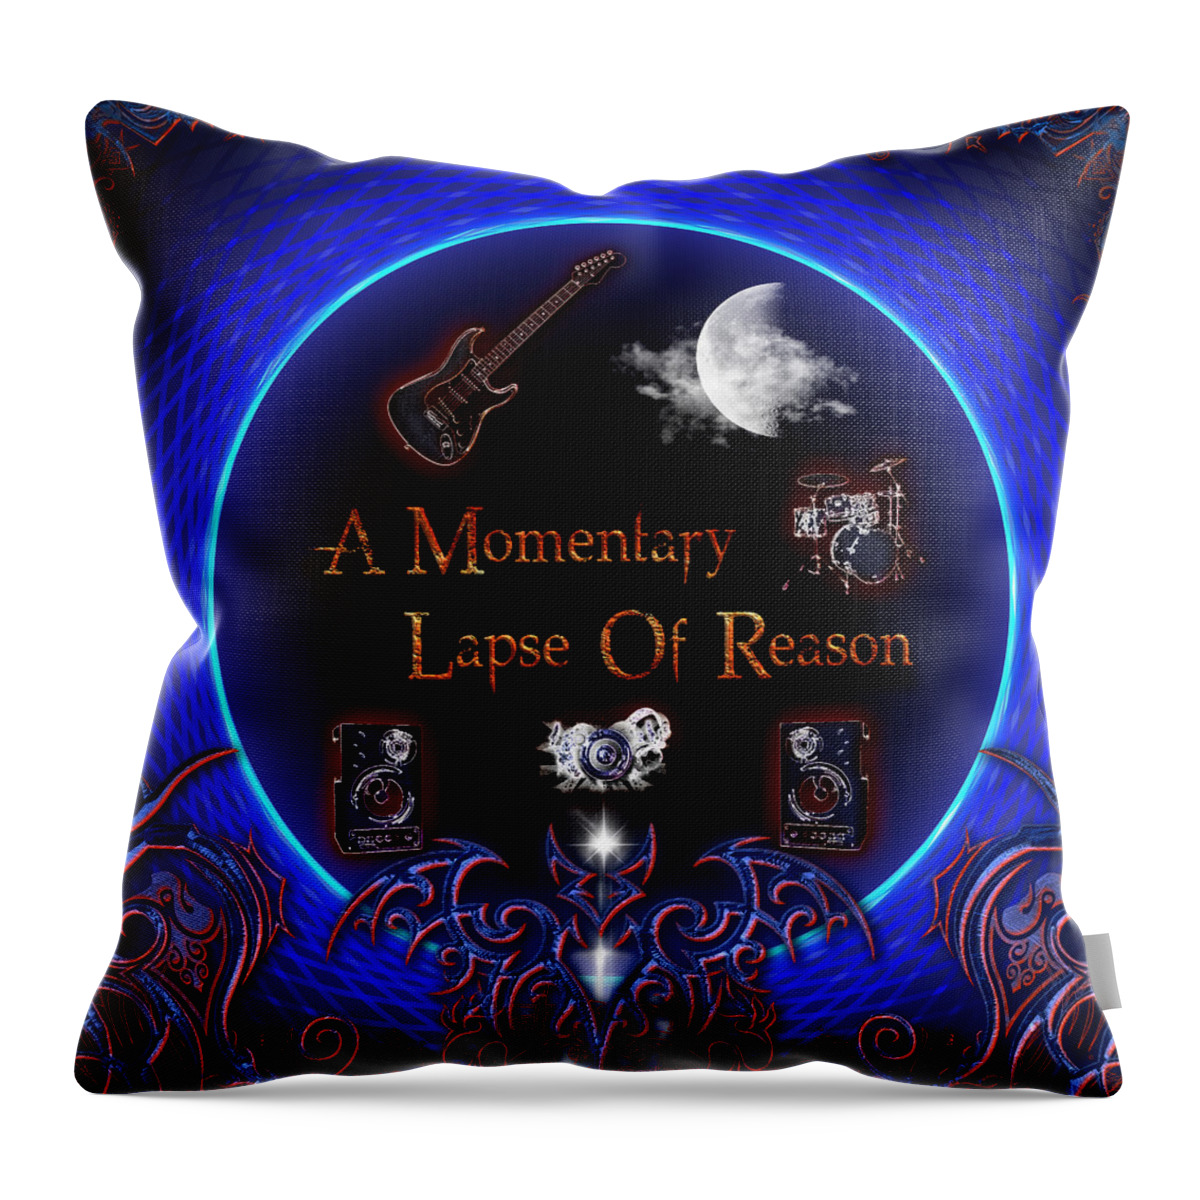 Pink Floyd Throw Pillow featuring the digital art A Momentary Lapse Of Reason by Michael Damiani